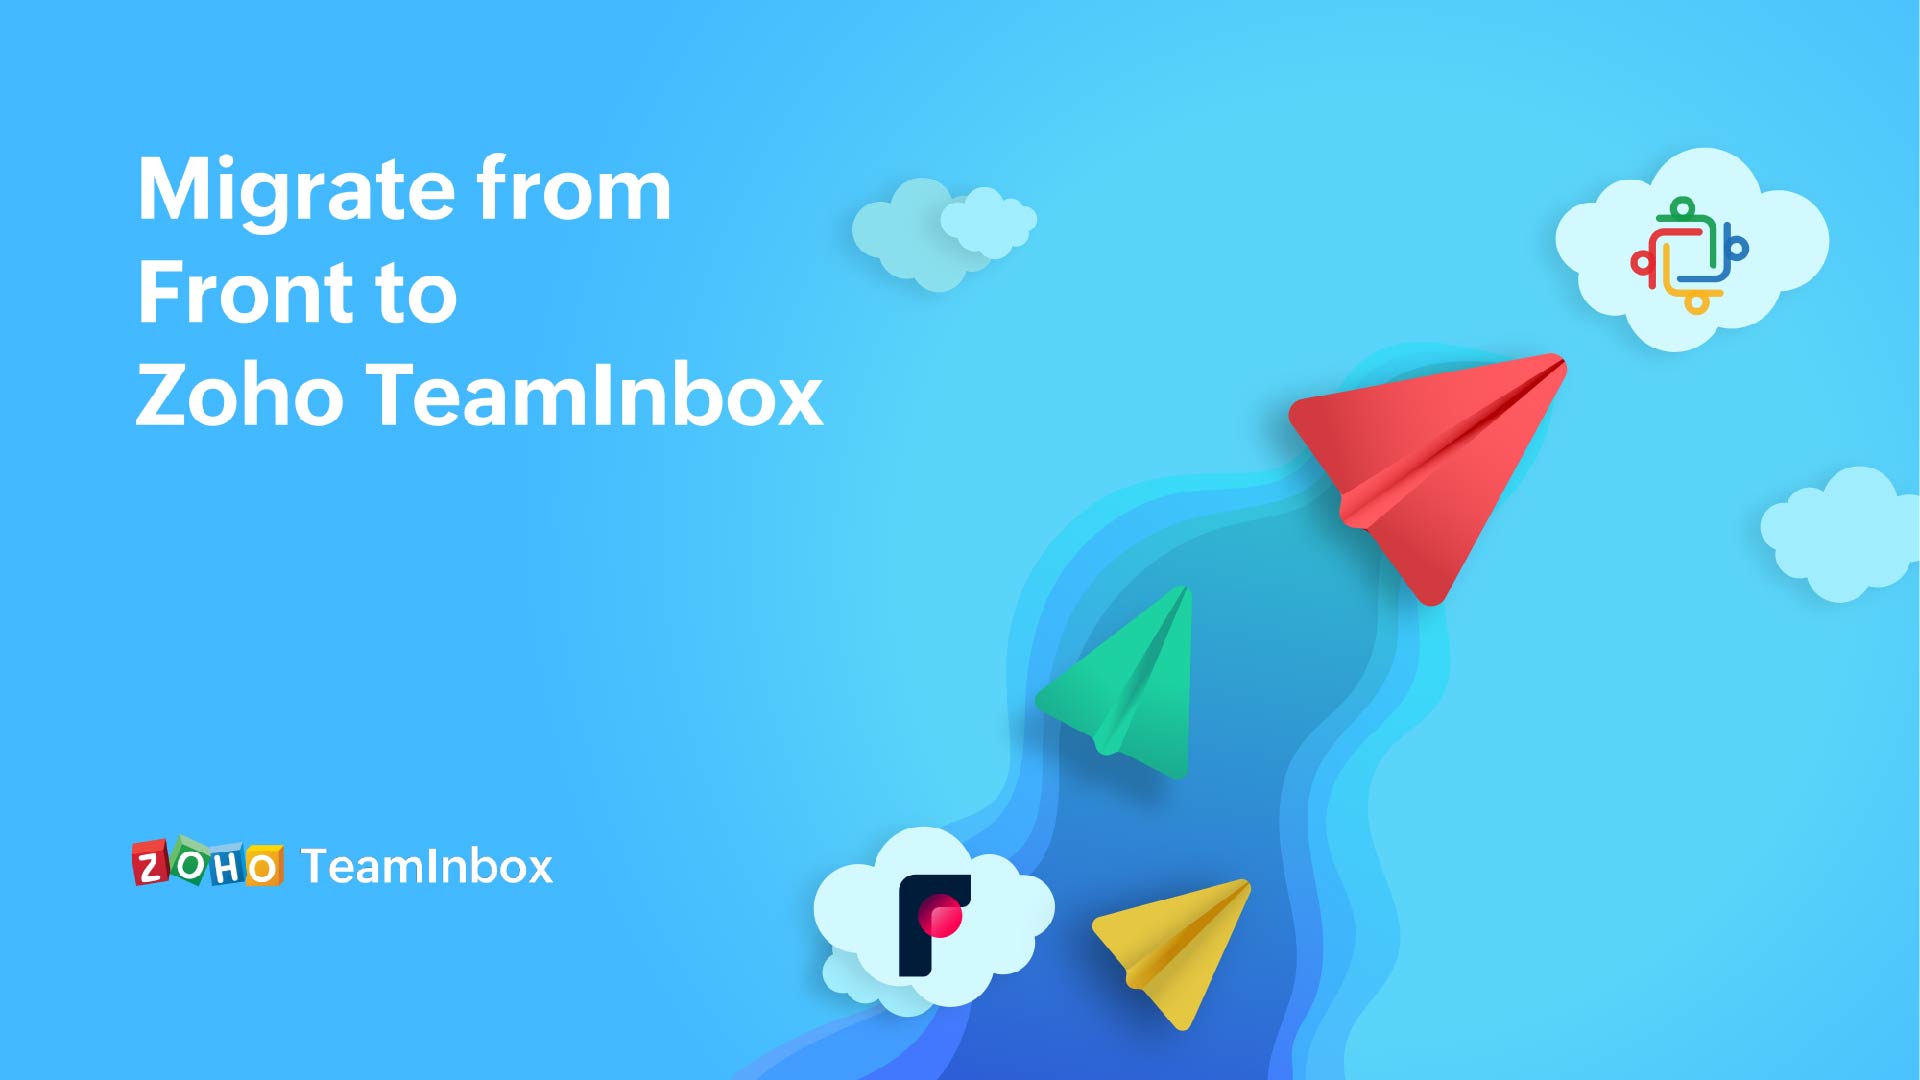 What makes Zoho TeamInbox a compelling alternative to Front?